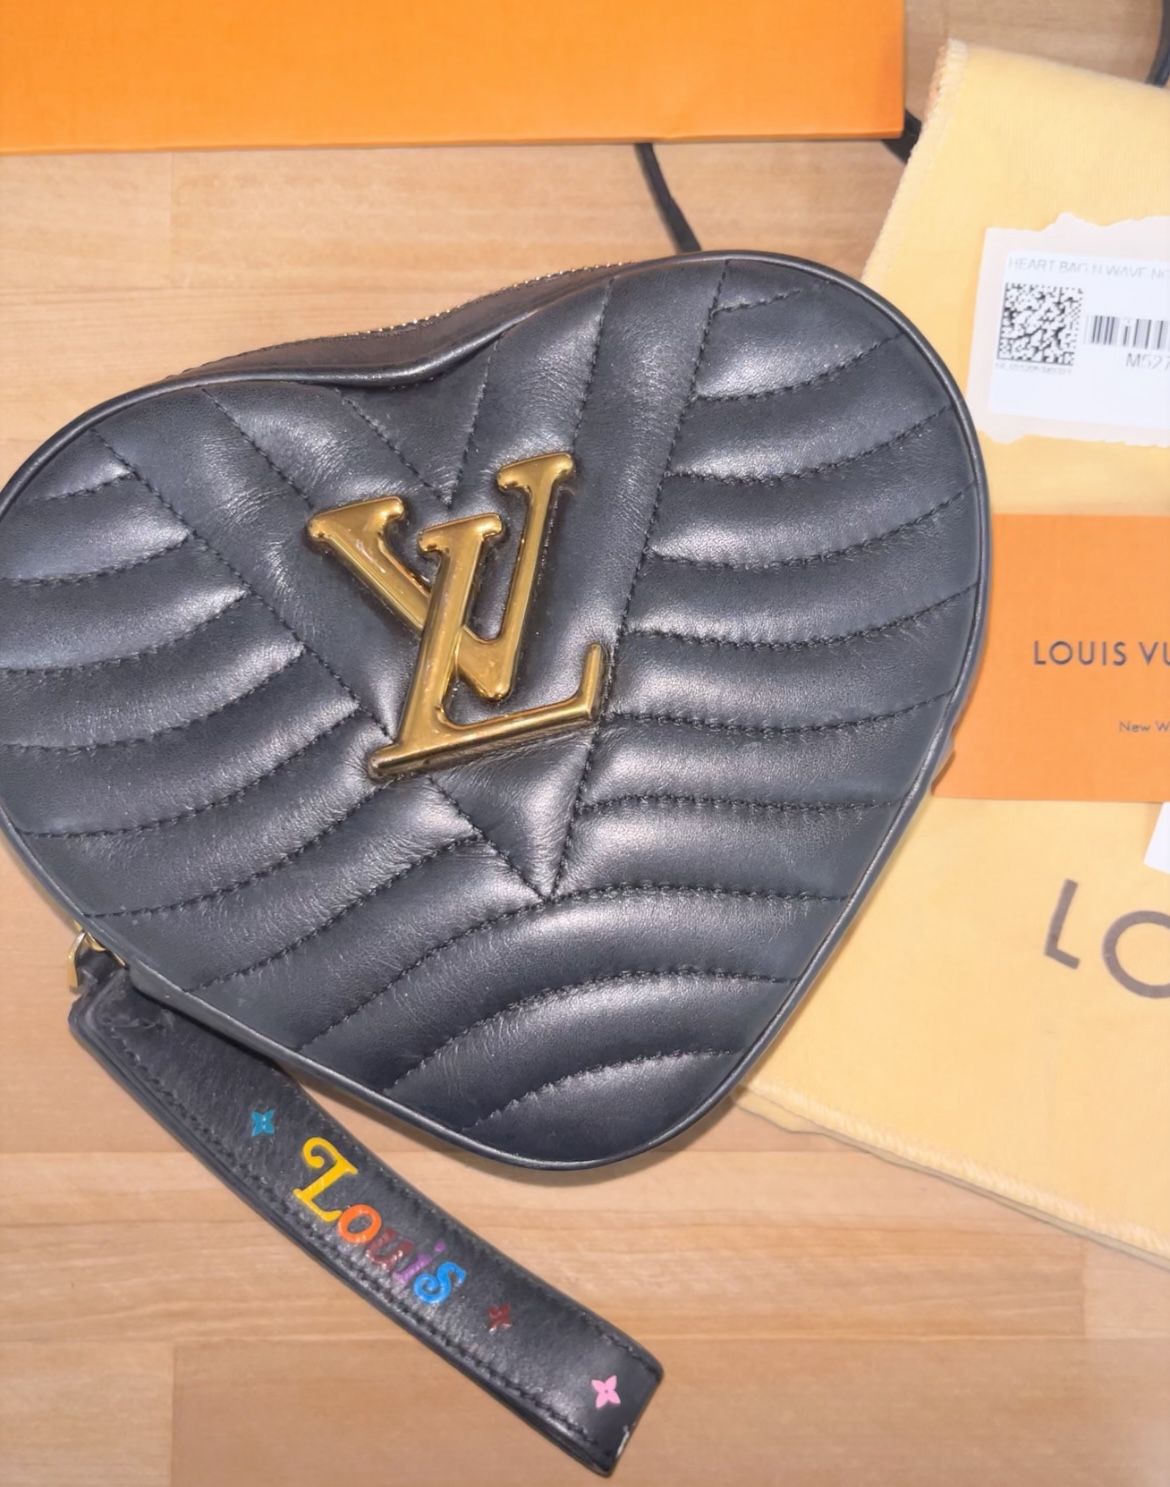 Louis Vuitton Coeur Heart Bag for Sale in Garfield Heights, OH